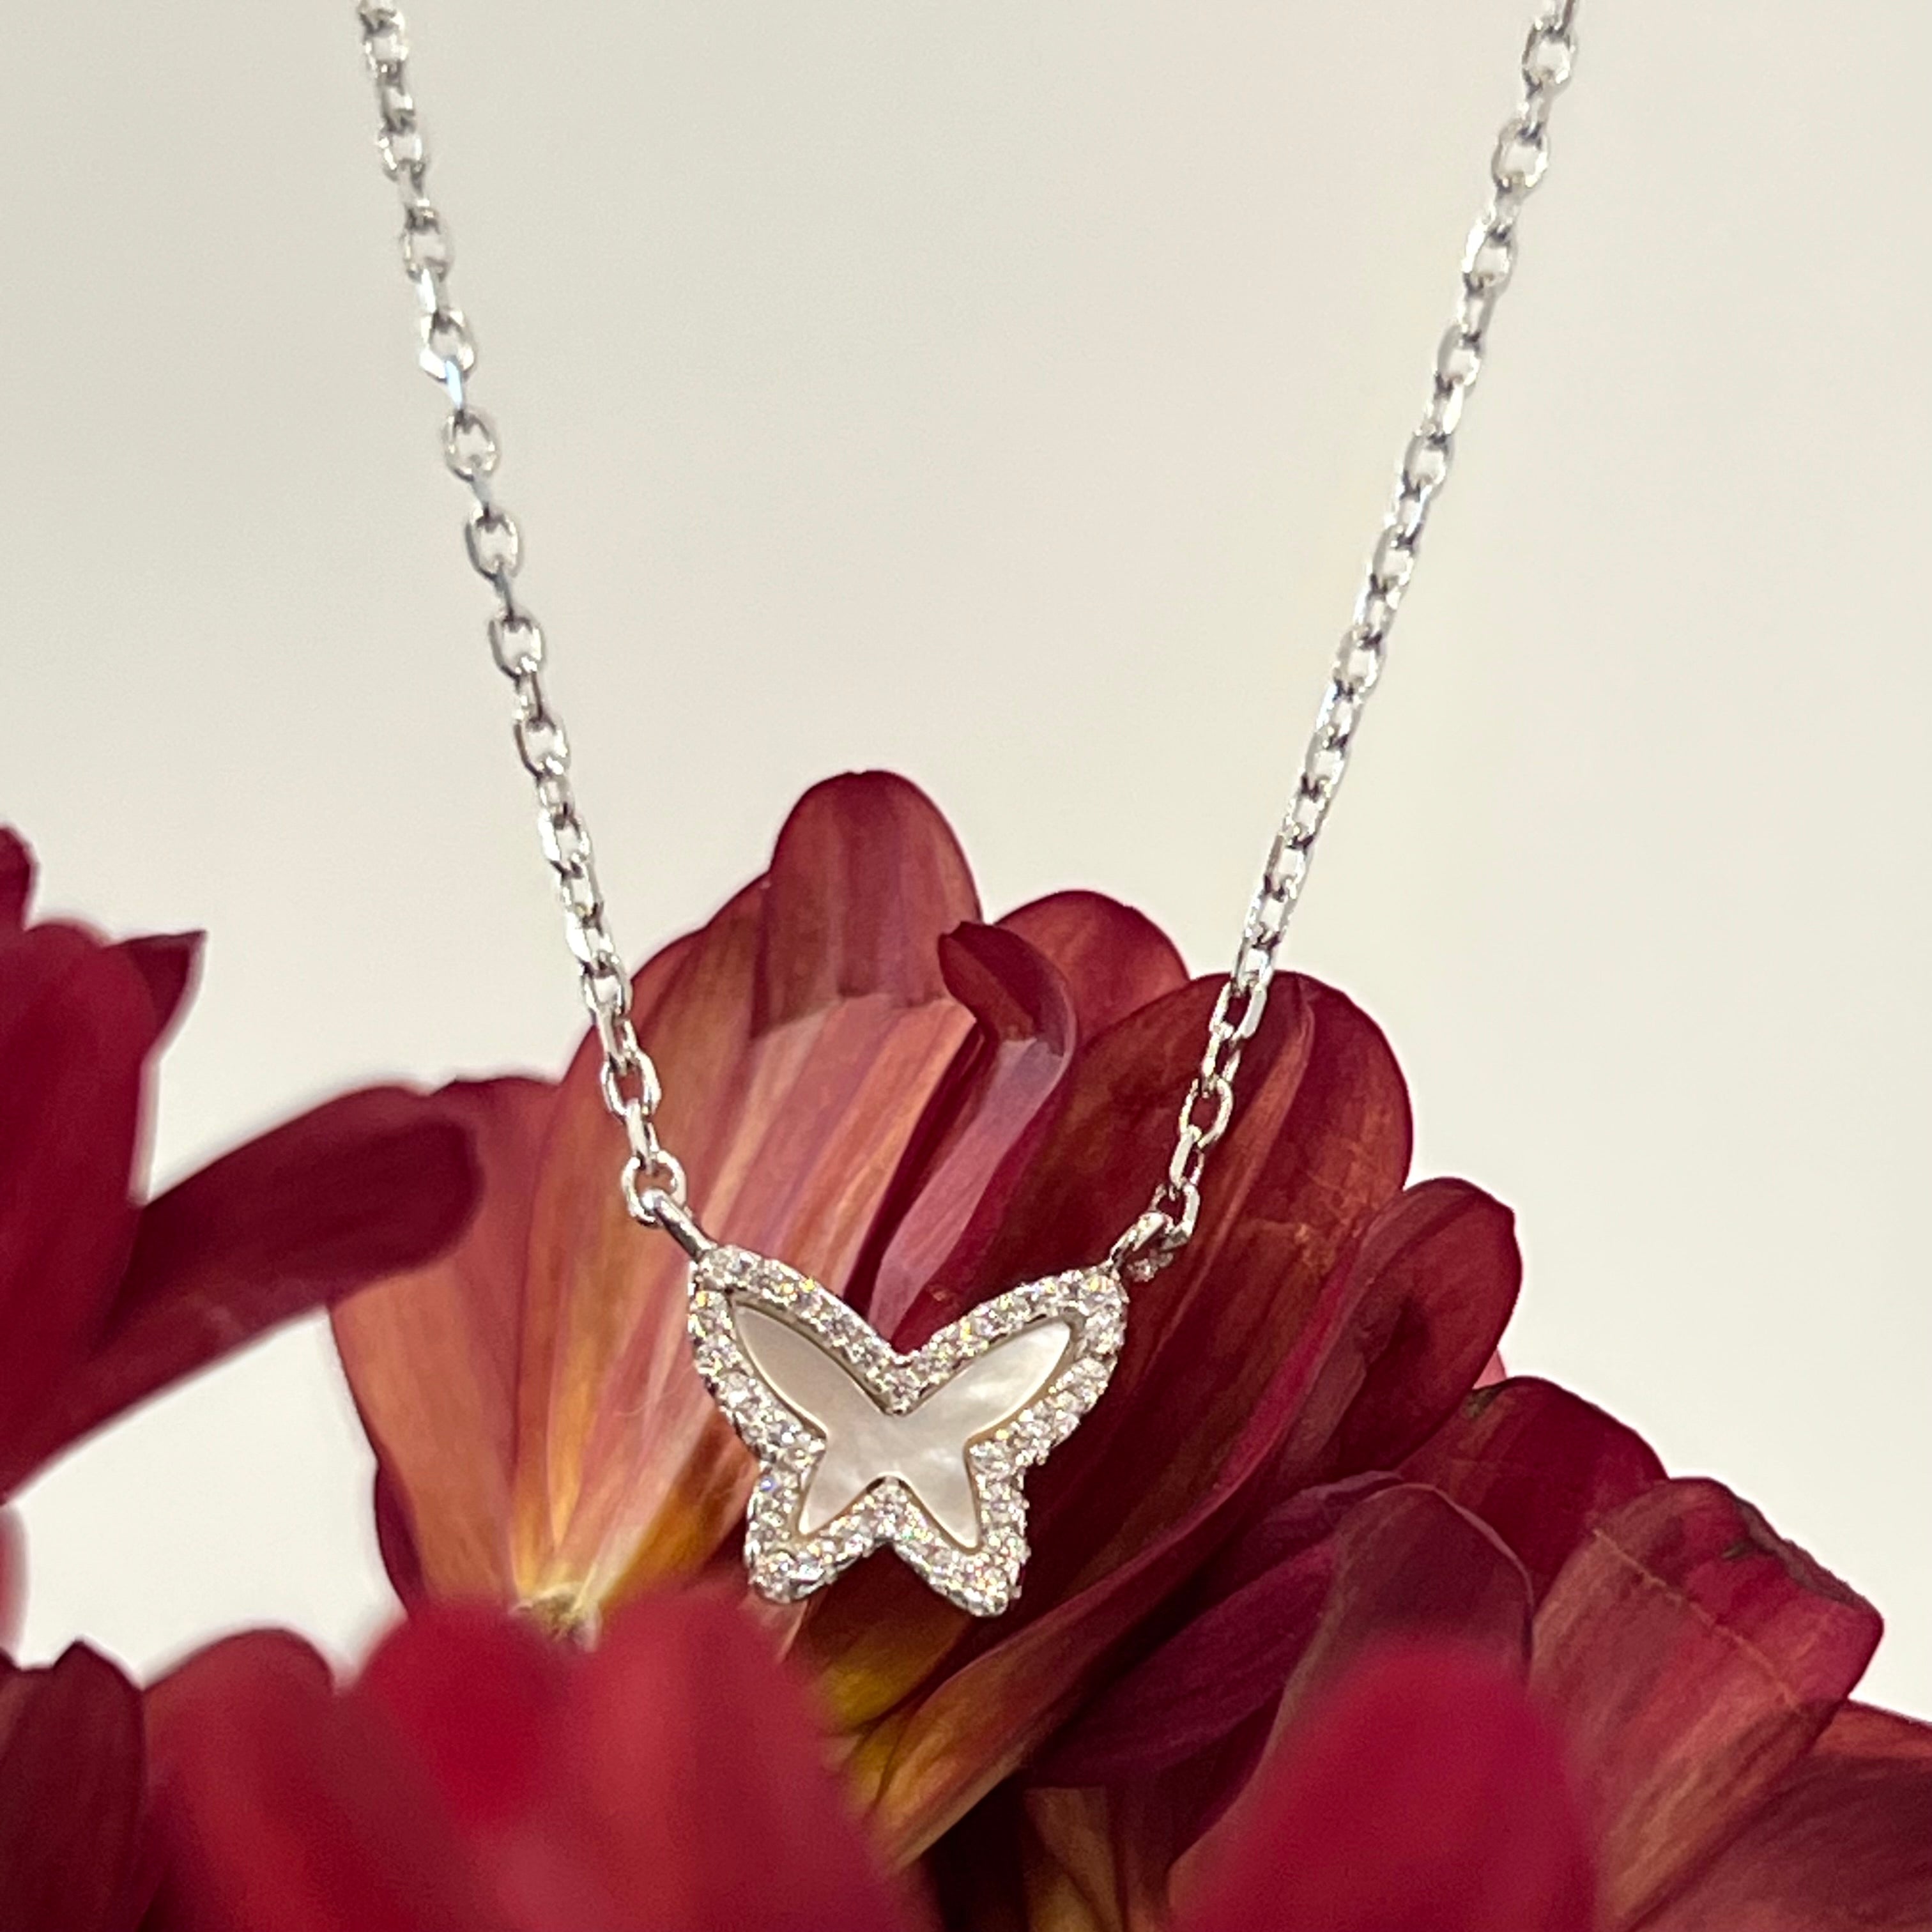 Silver Dainty Diamante Butterfly Necklace